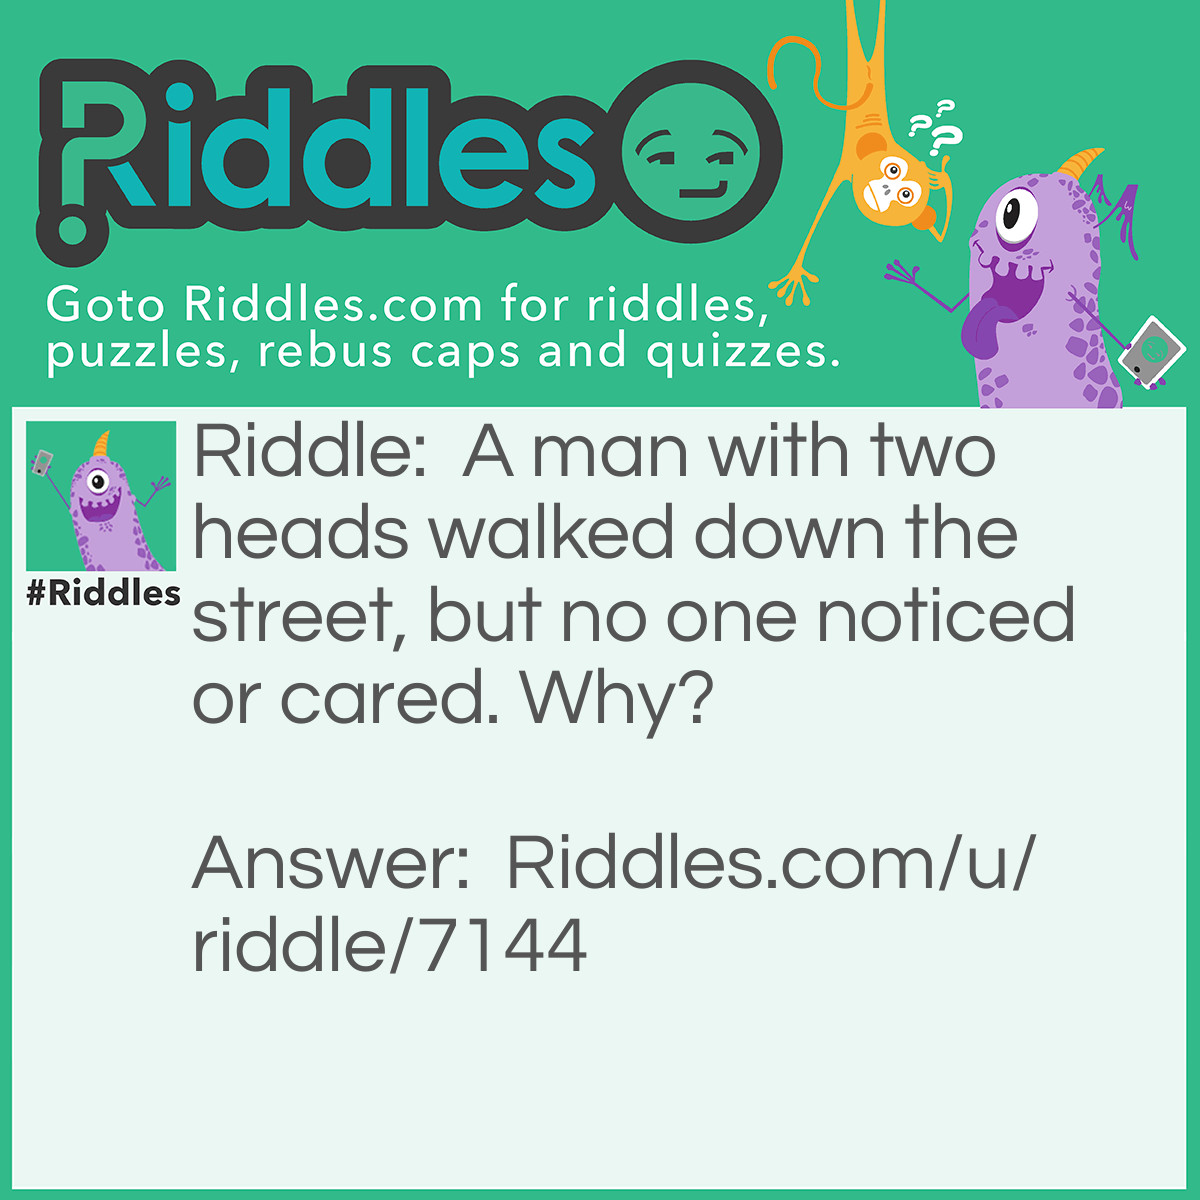 Riddle: A man with two heads walked down the street, but no one noticed or cared. Why? Answer: The second head was the head of lettuce he was carrying!